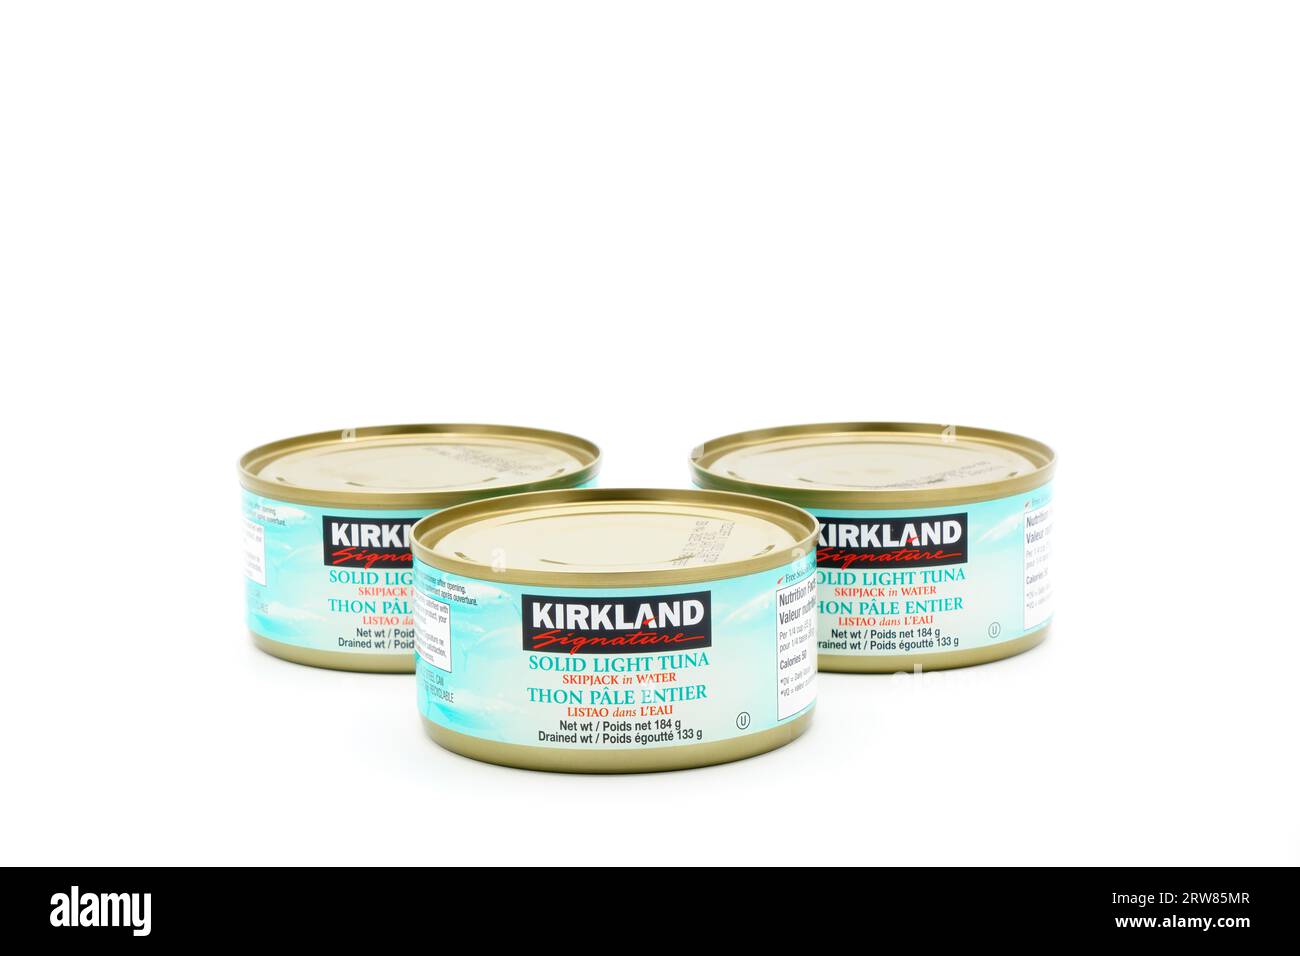 Tins of Kirckland Brand Solid Light Tuna.  Kirkland Brand is a private label sold exclusively at Costco wholesale stores. Stock Photo